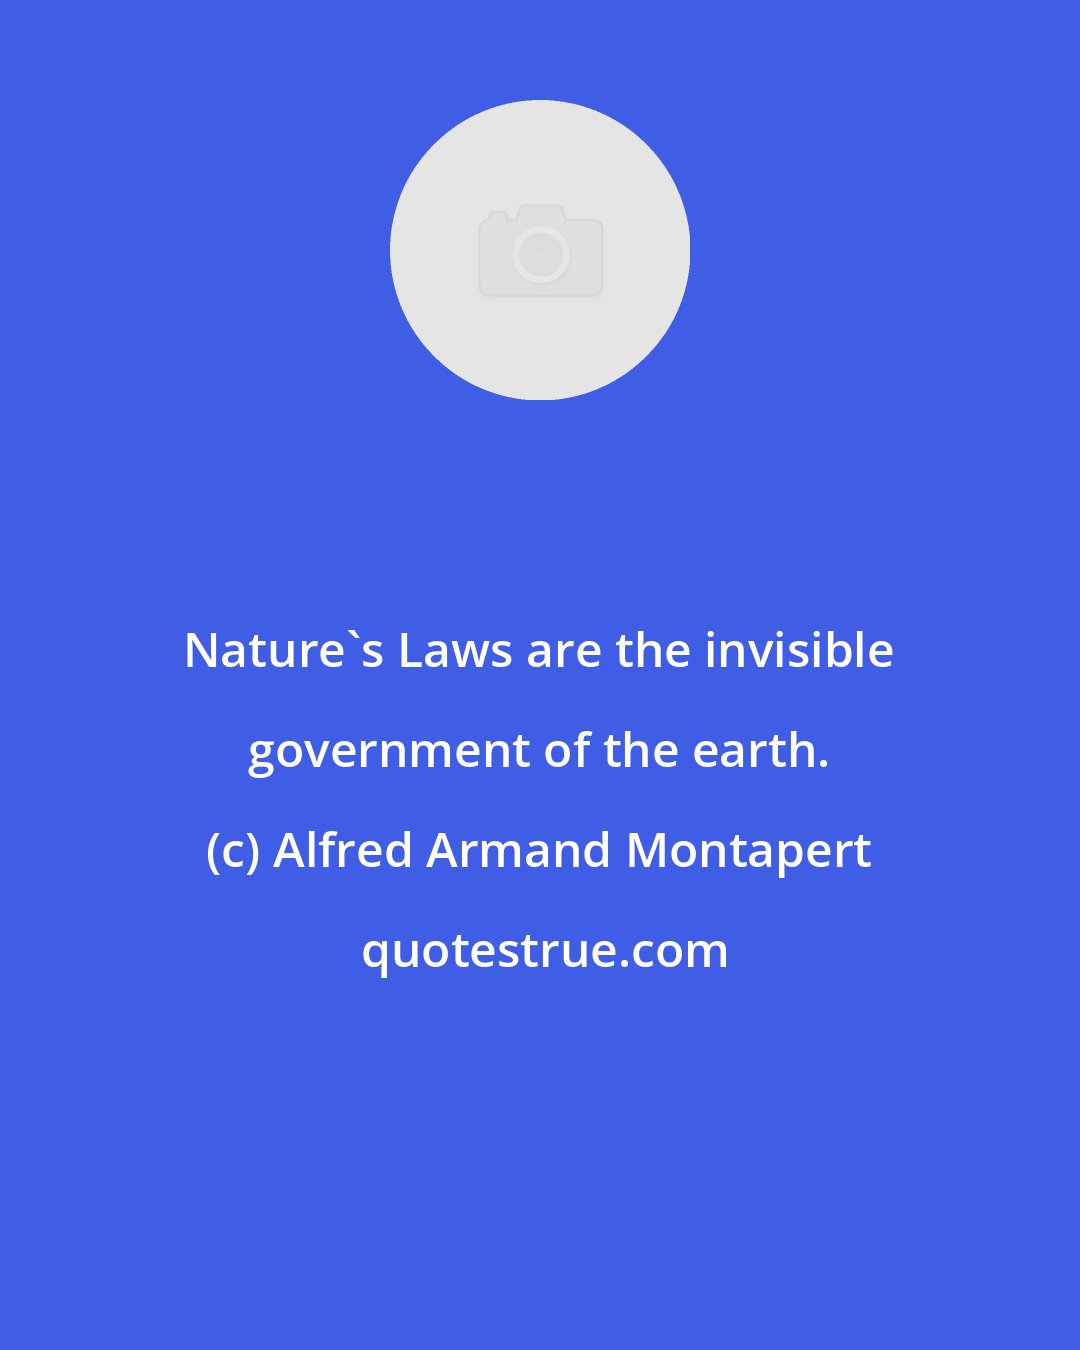 Alfred Armand Montapert: Nature's Laws are the invisible government of the earth.